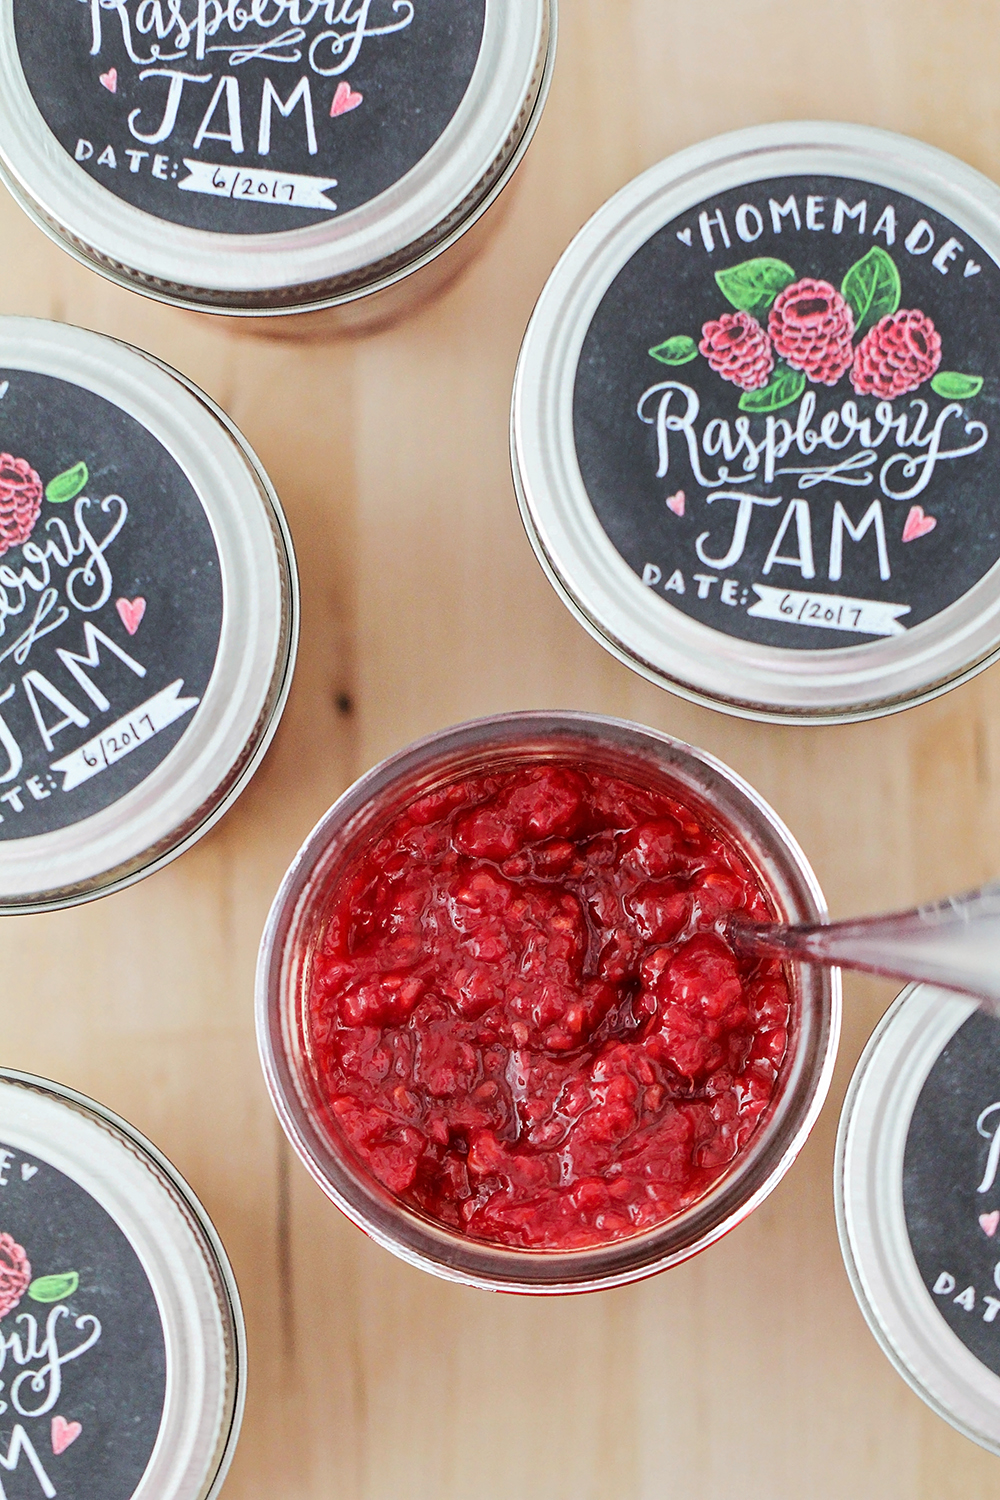 This low sugar fresh raspberry jam has way less sugar than regular jam, but is just as delicious. It's so easy to make, too!